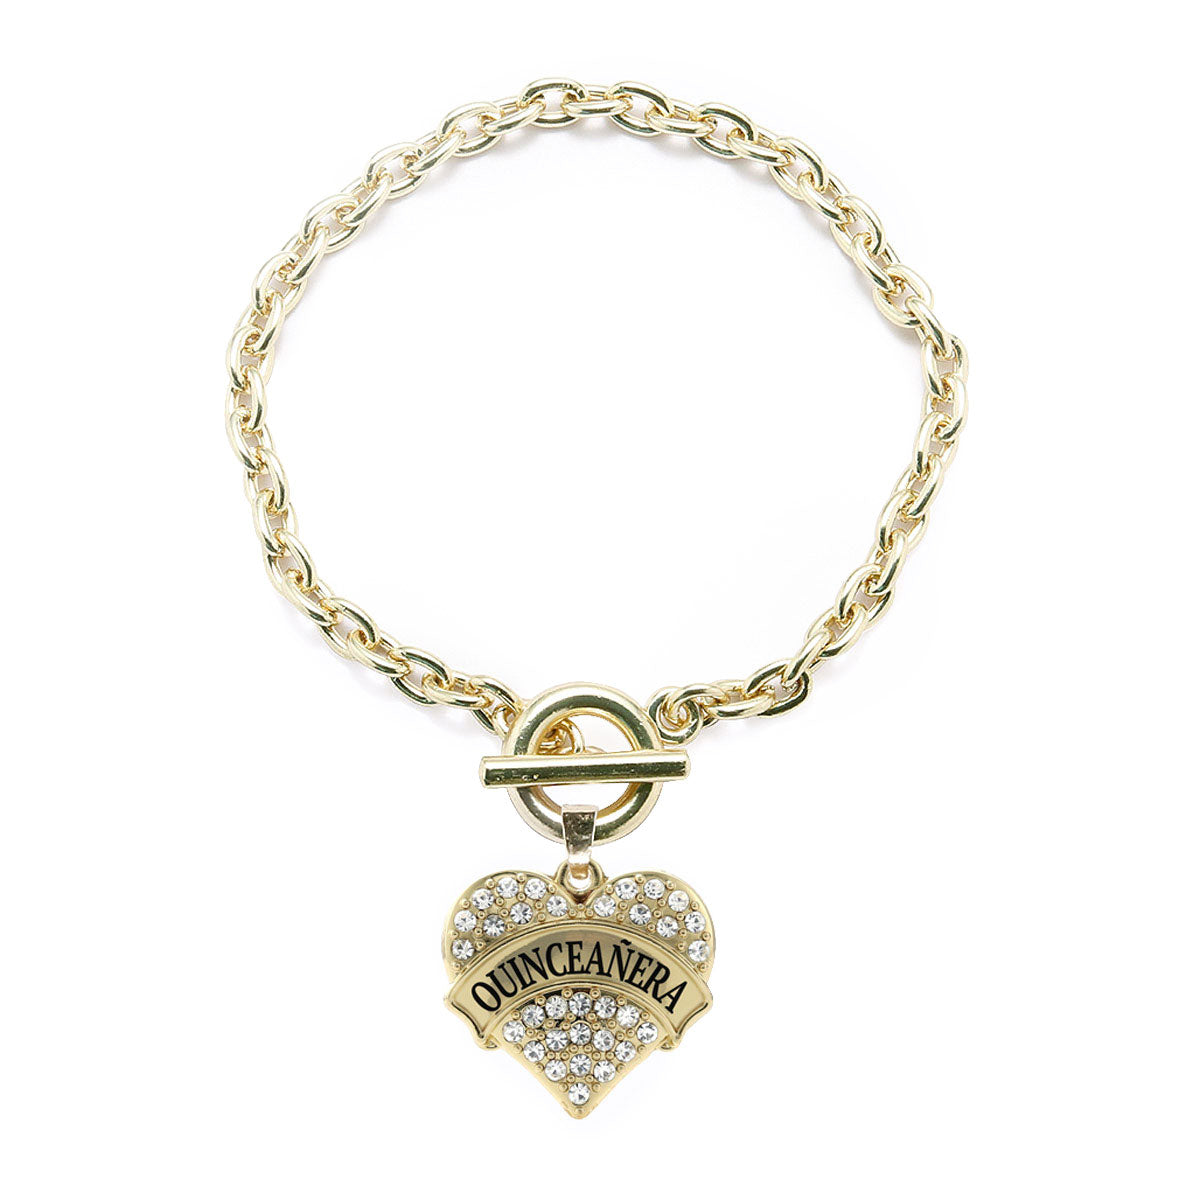 Gold Quinceanera Pave Heart Charm Toggle Bracelet